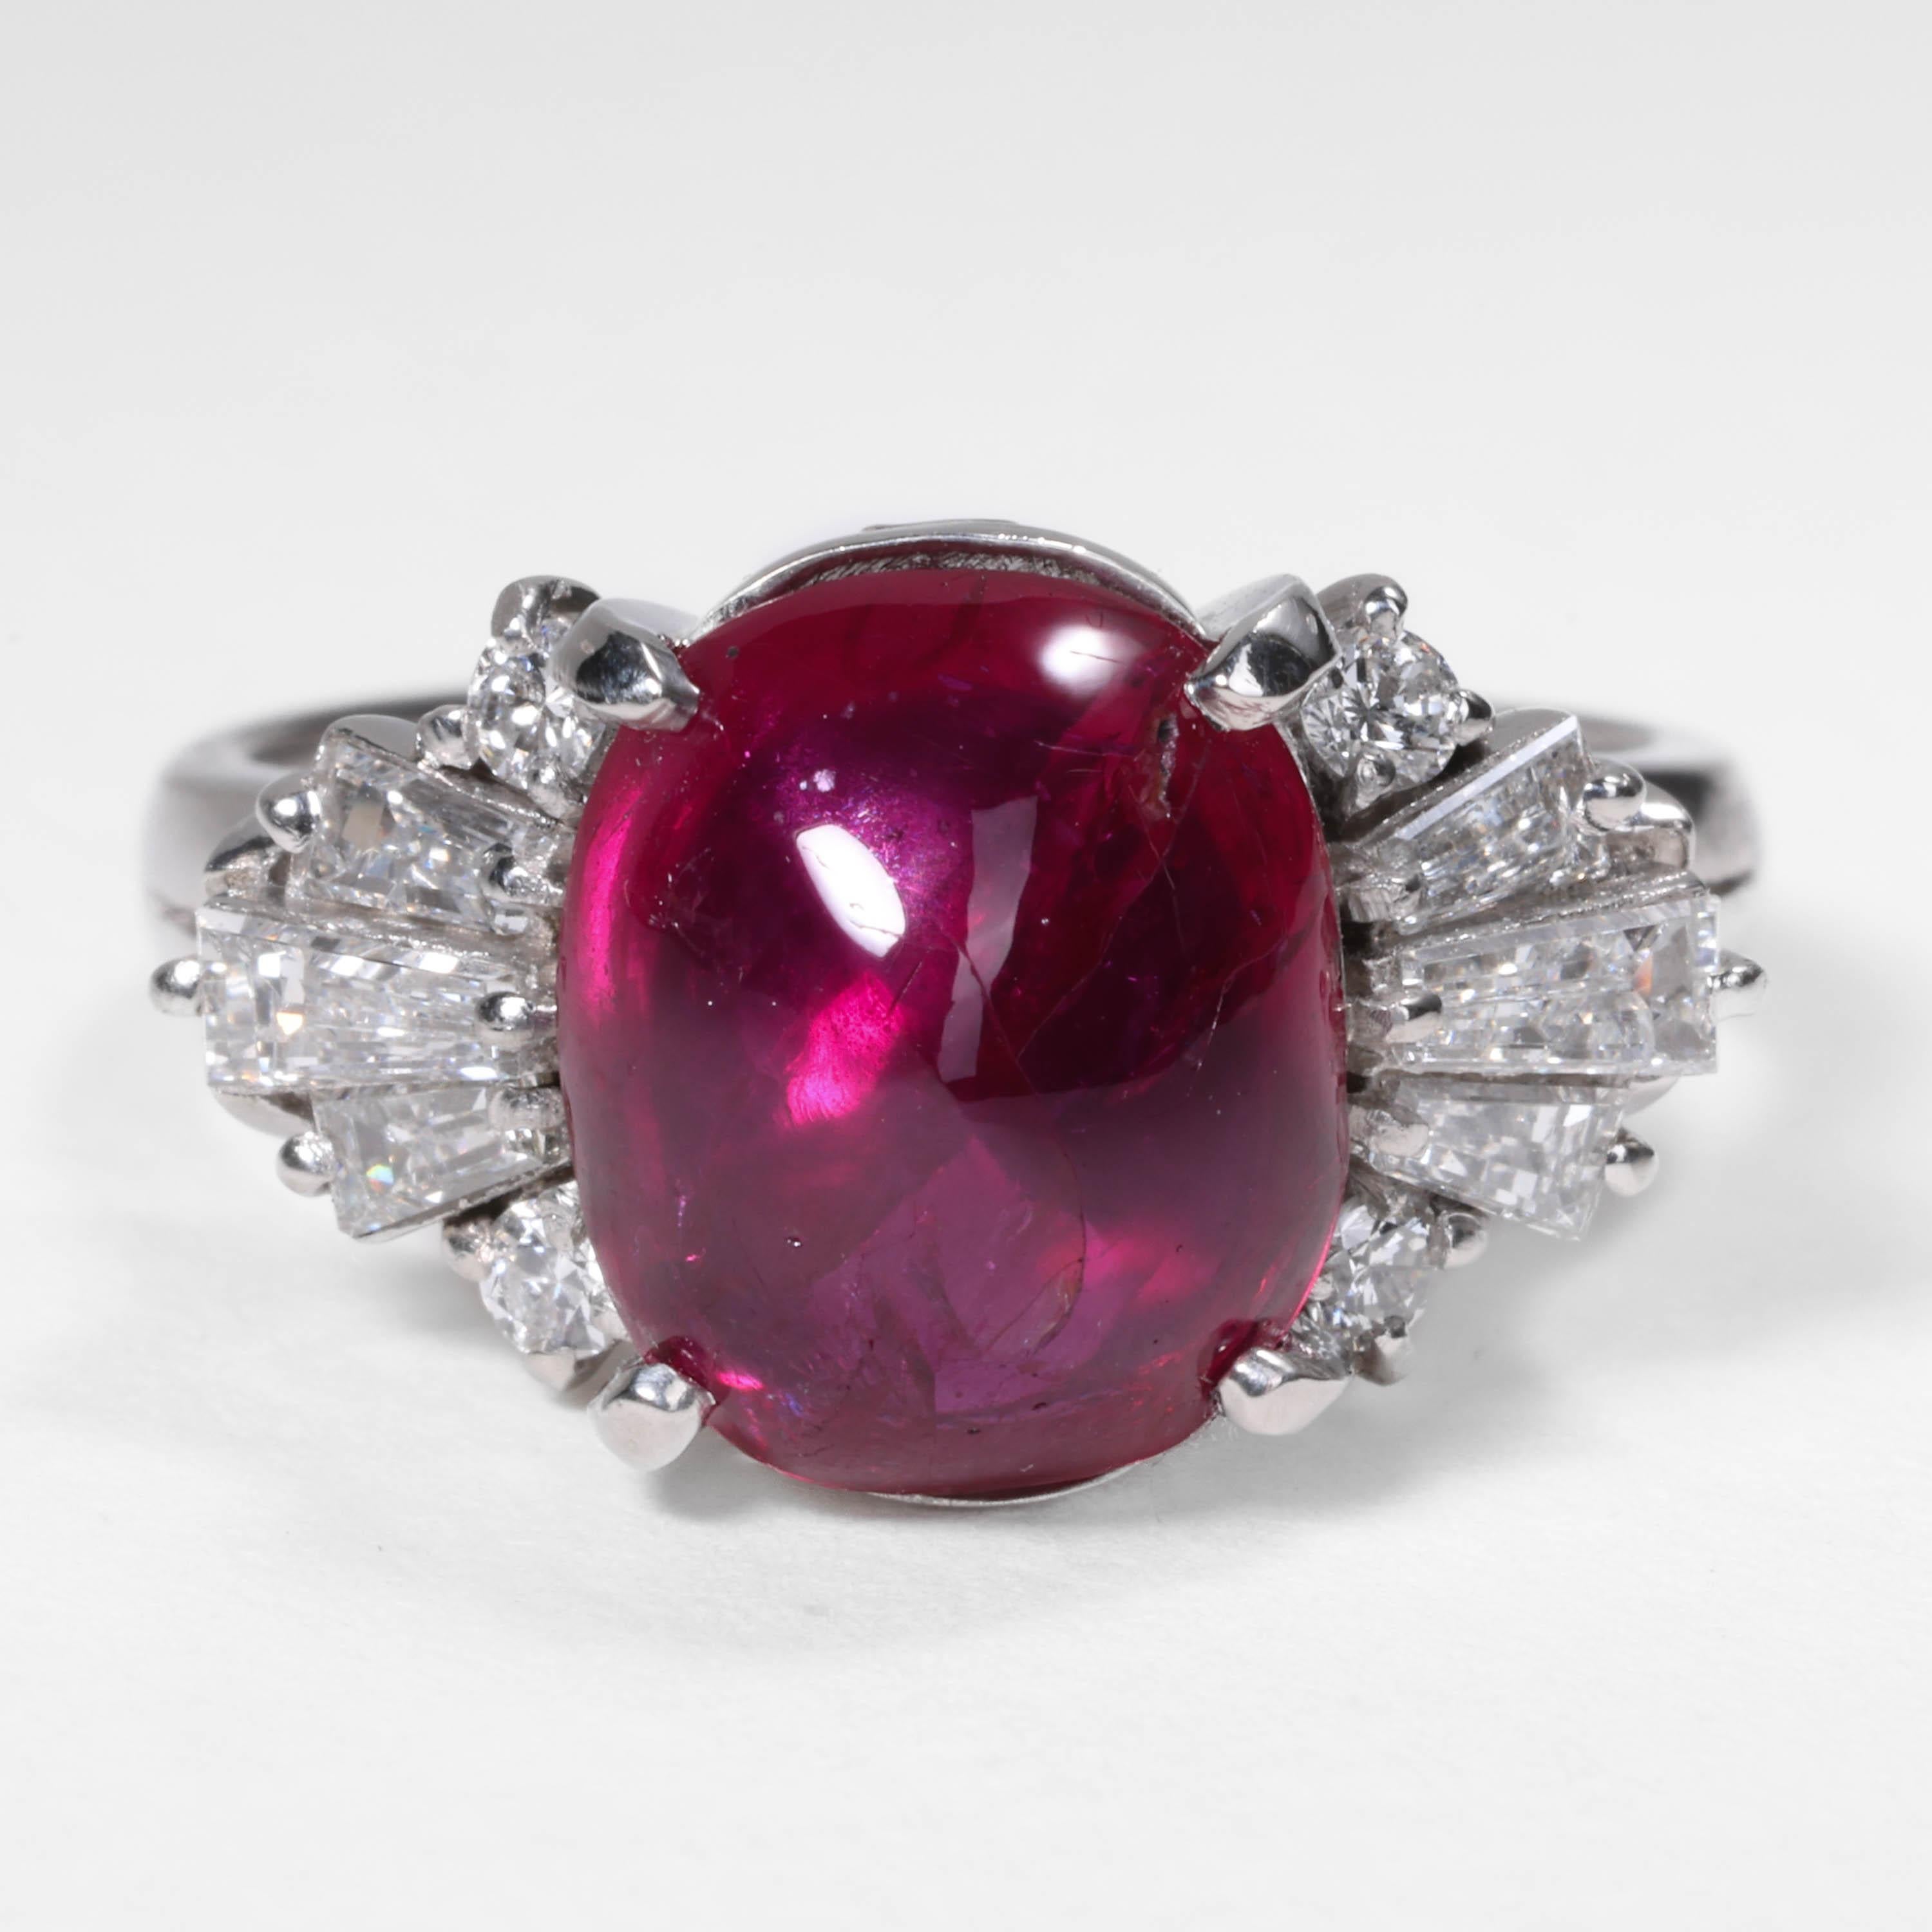 Burma Ruby No-Heat 4.75 Carats Set in Vintage Platinum Mounting, Certified For Sale 1